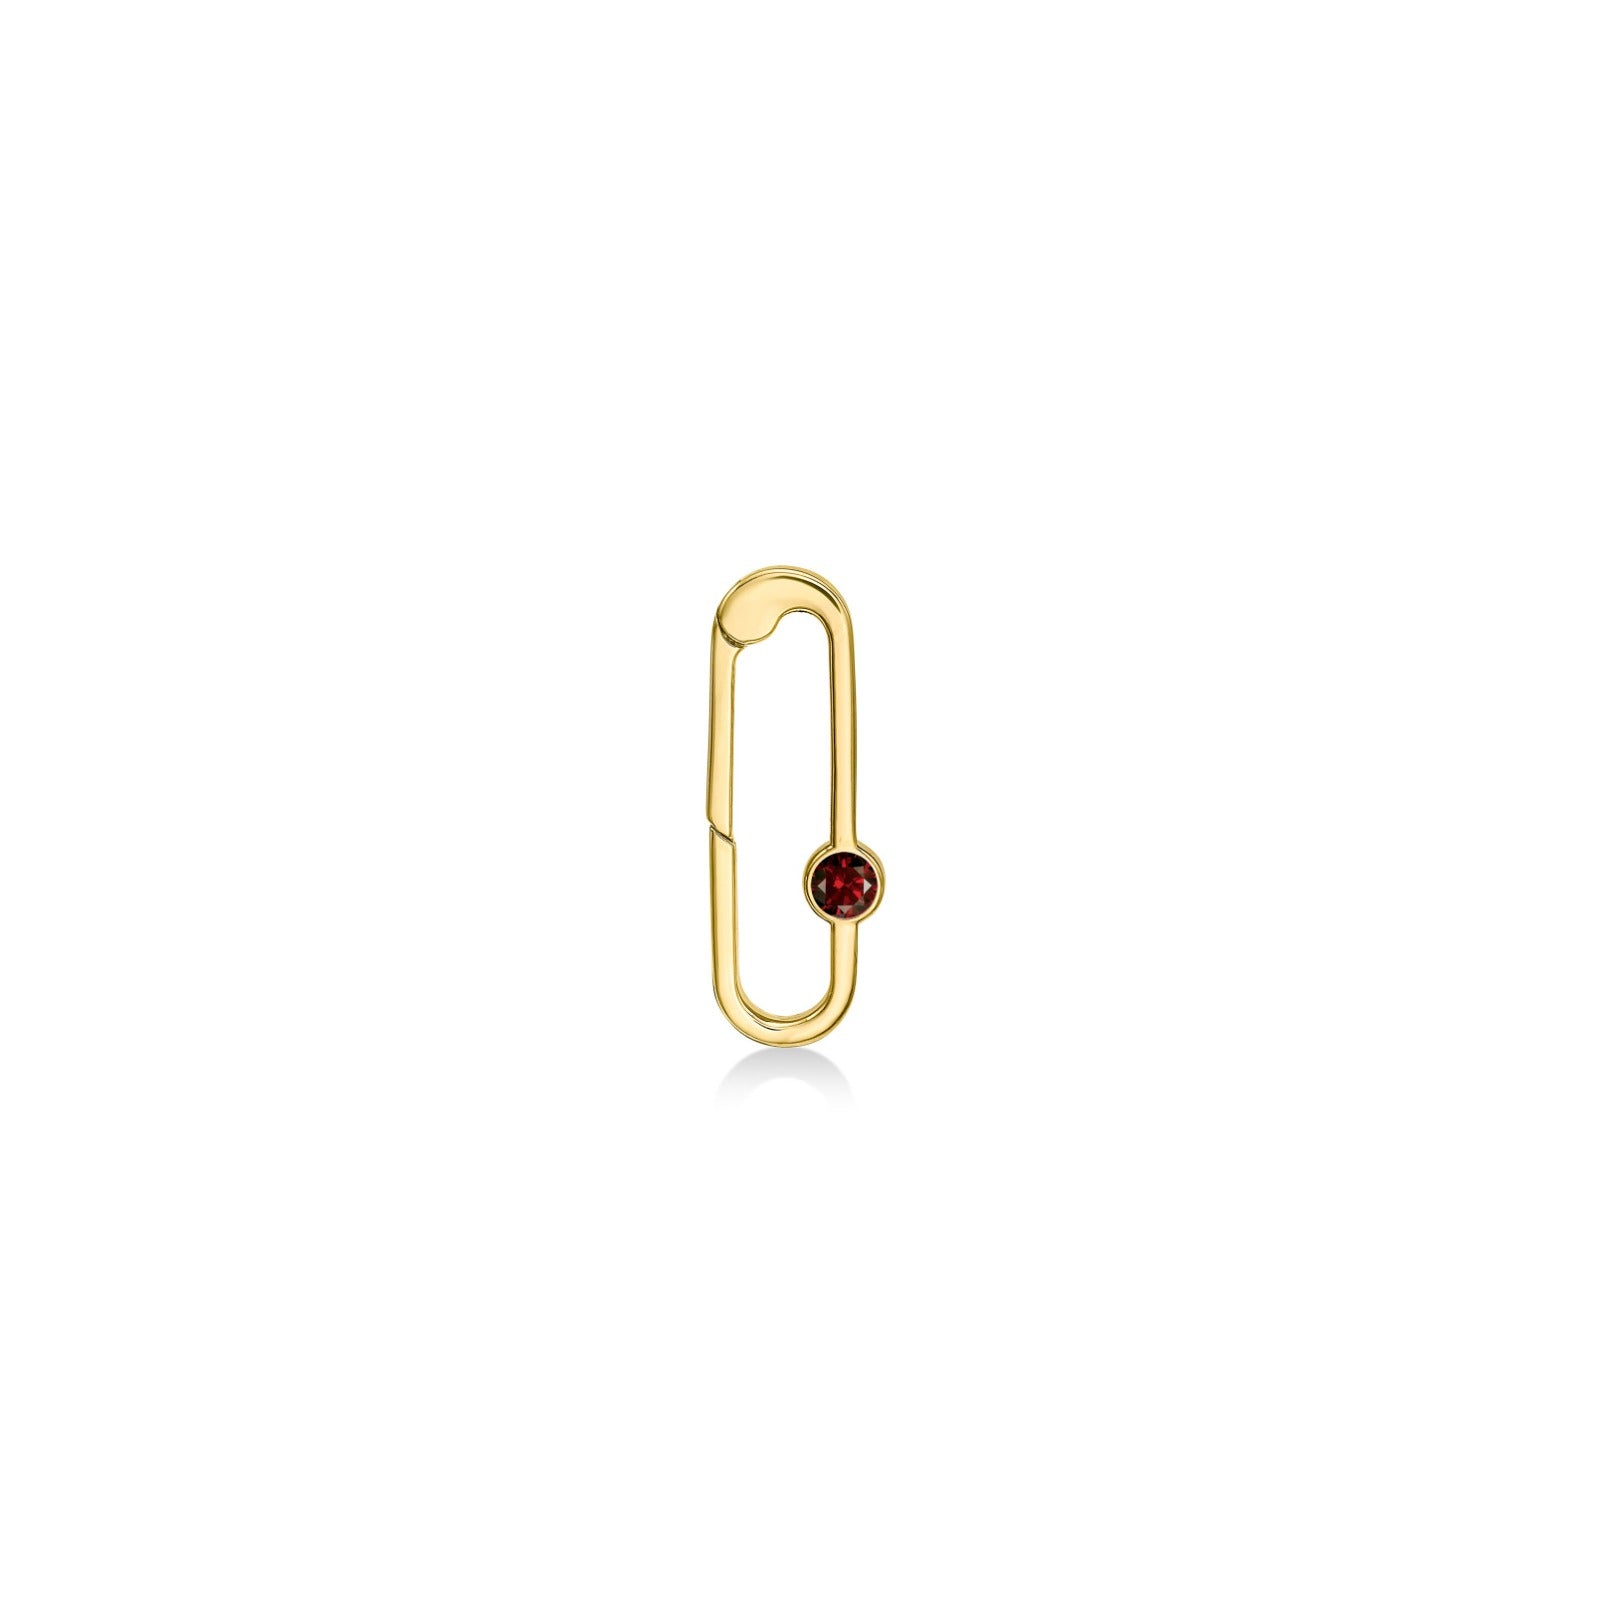 14k gold paperclip charm lock with garnet